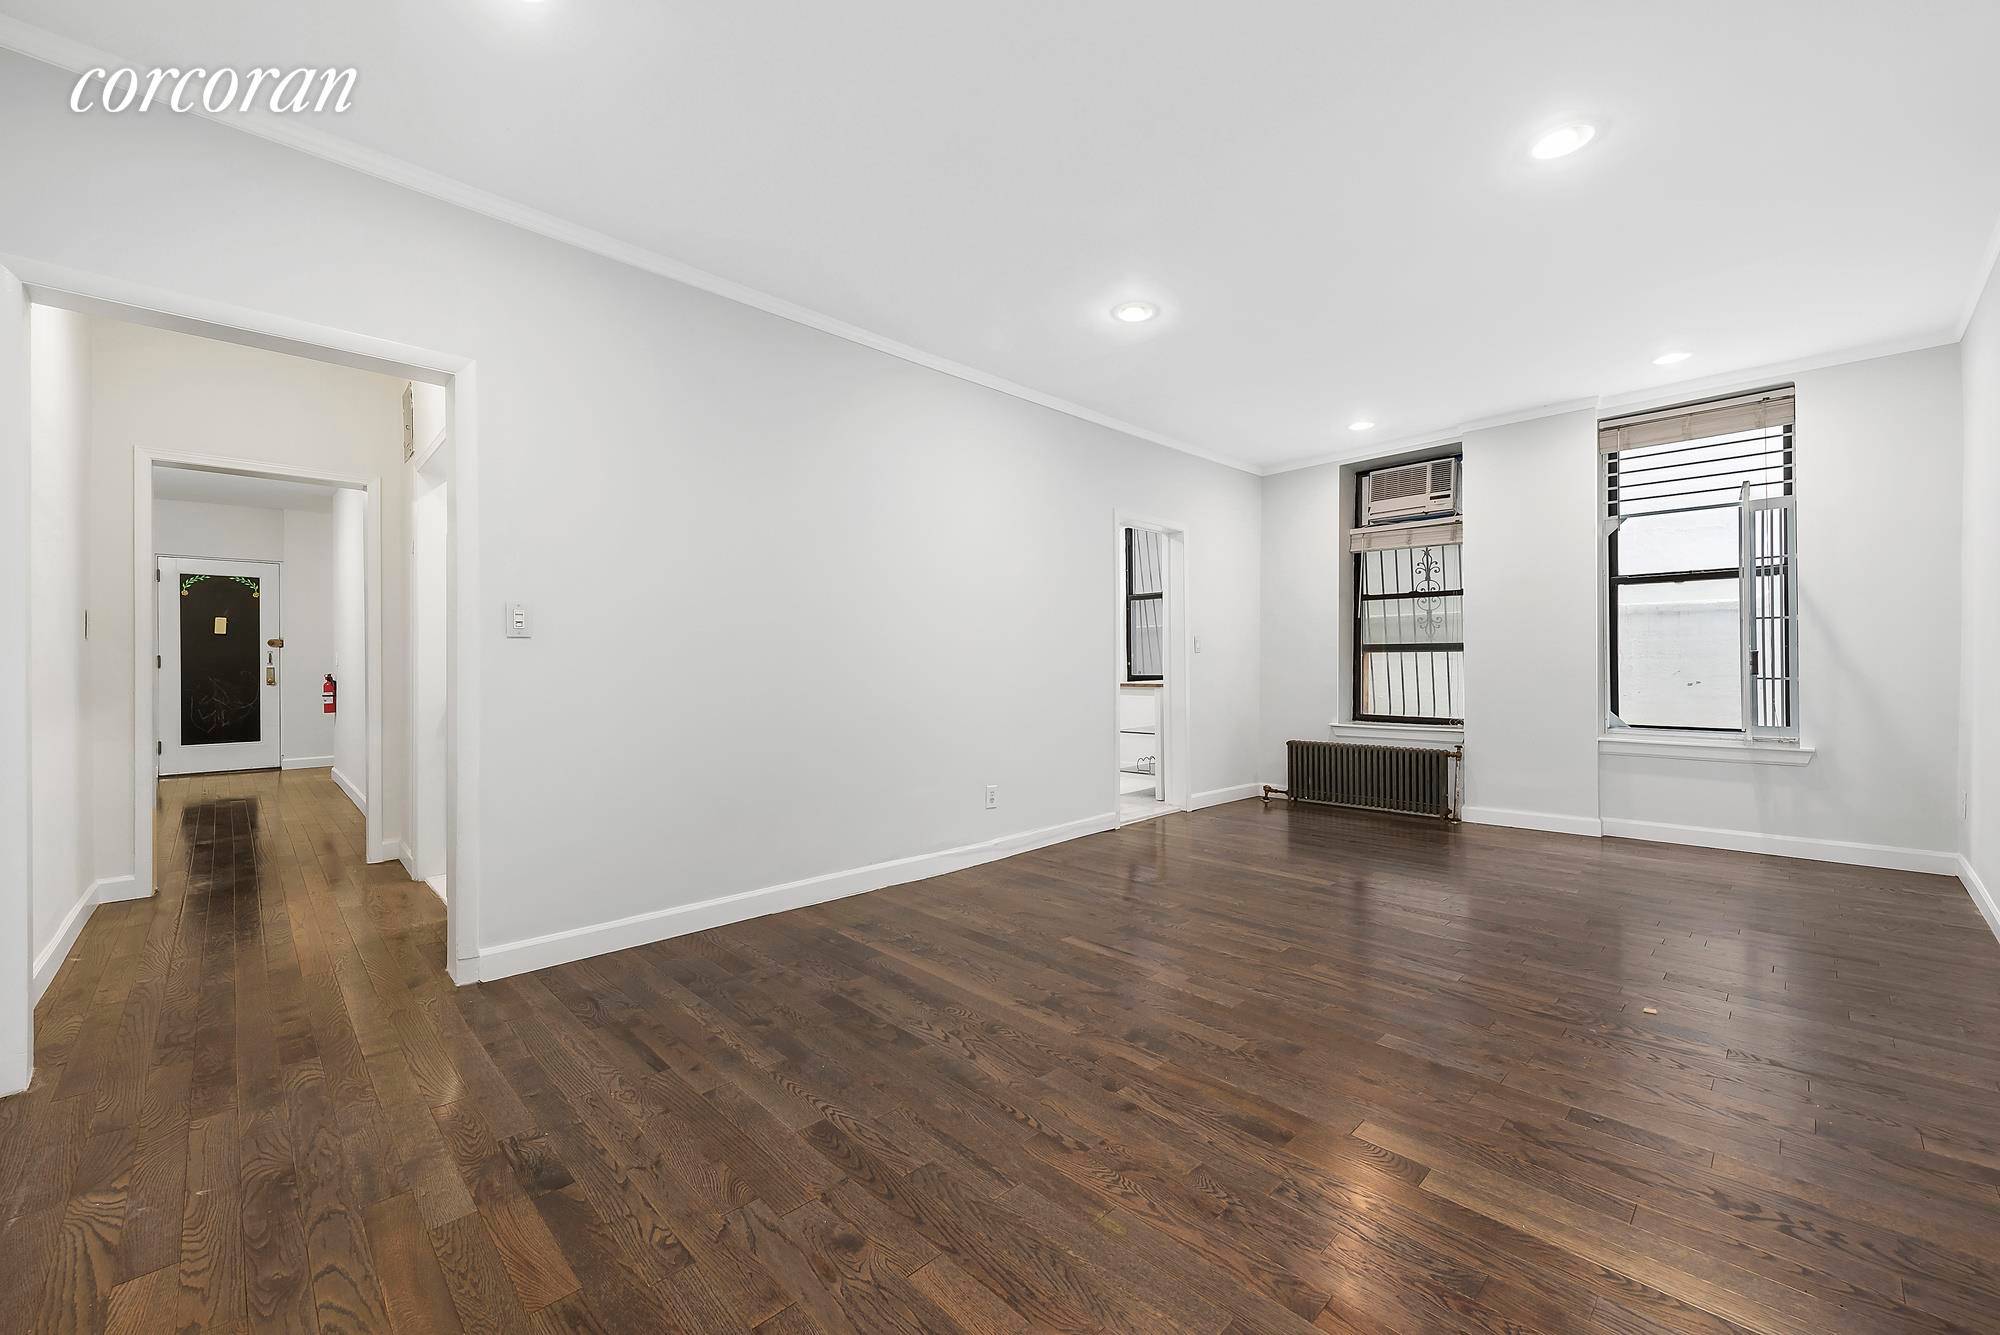 Beautiful and spacious renovated 2 bedroom home in Kew Gardens Terrace Cooperative.